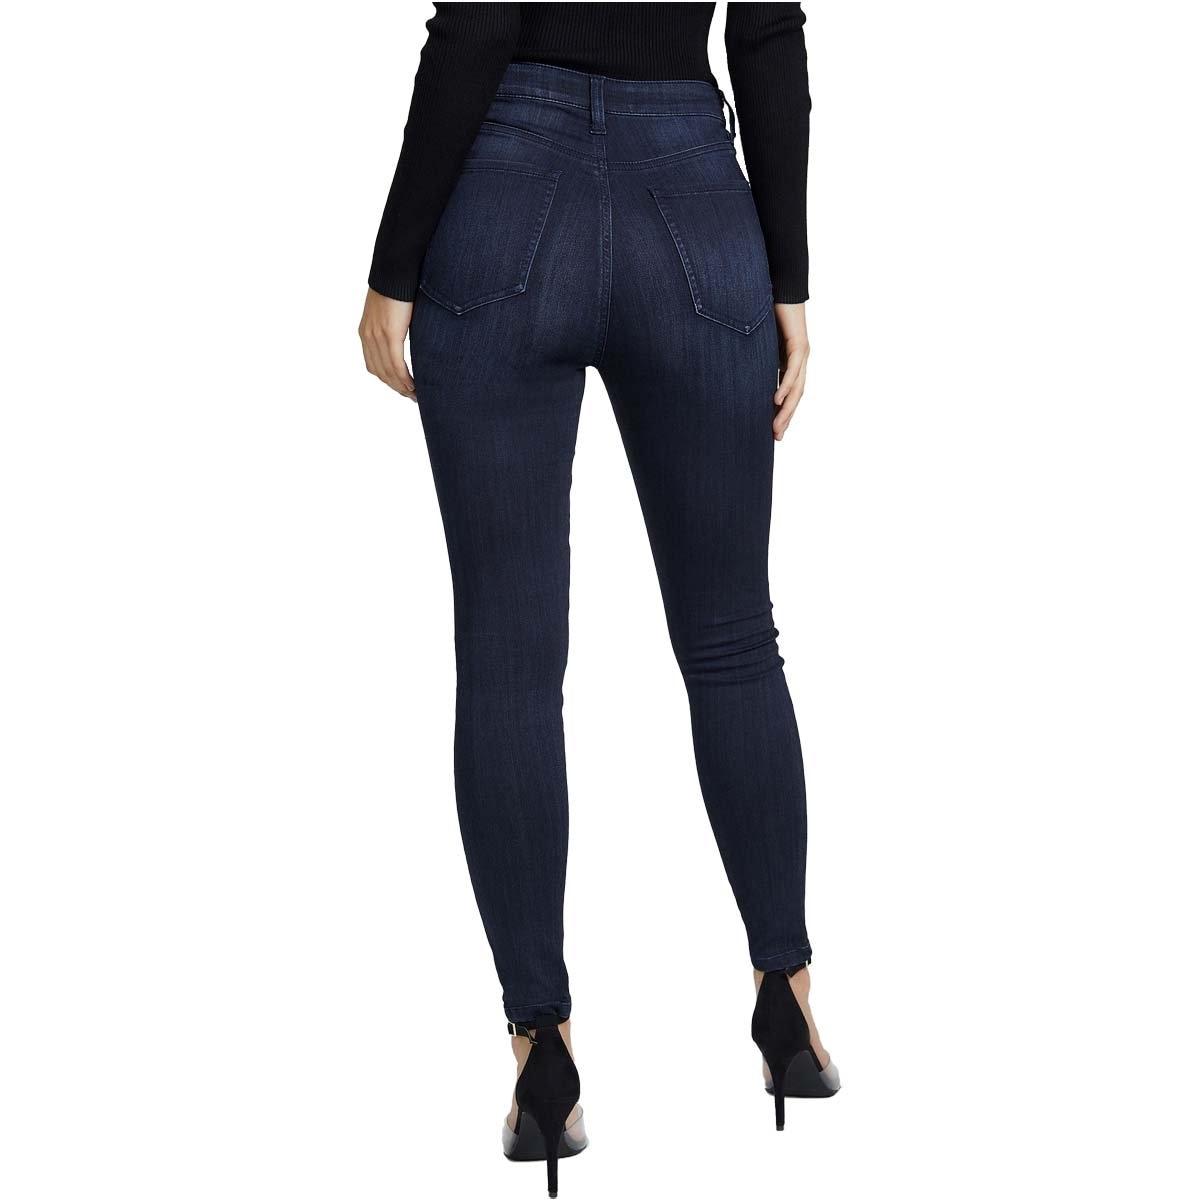 Jeans Denim G By Guess para Dama